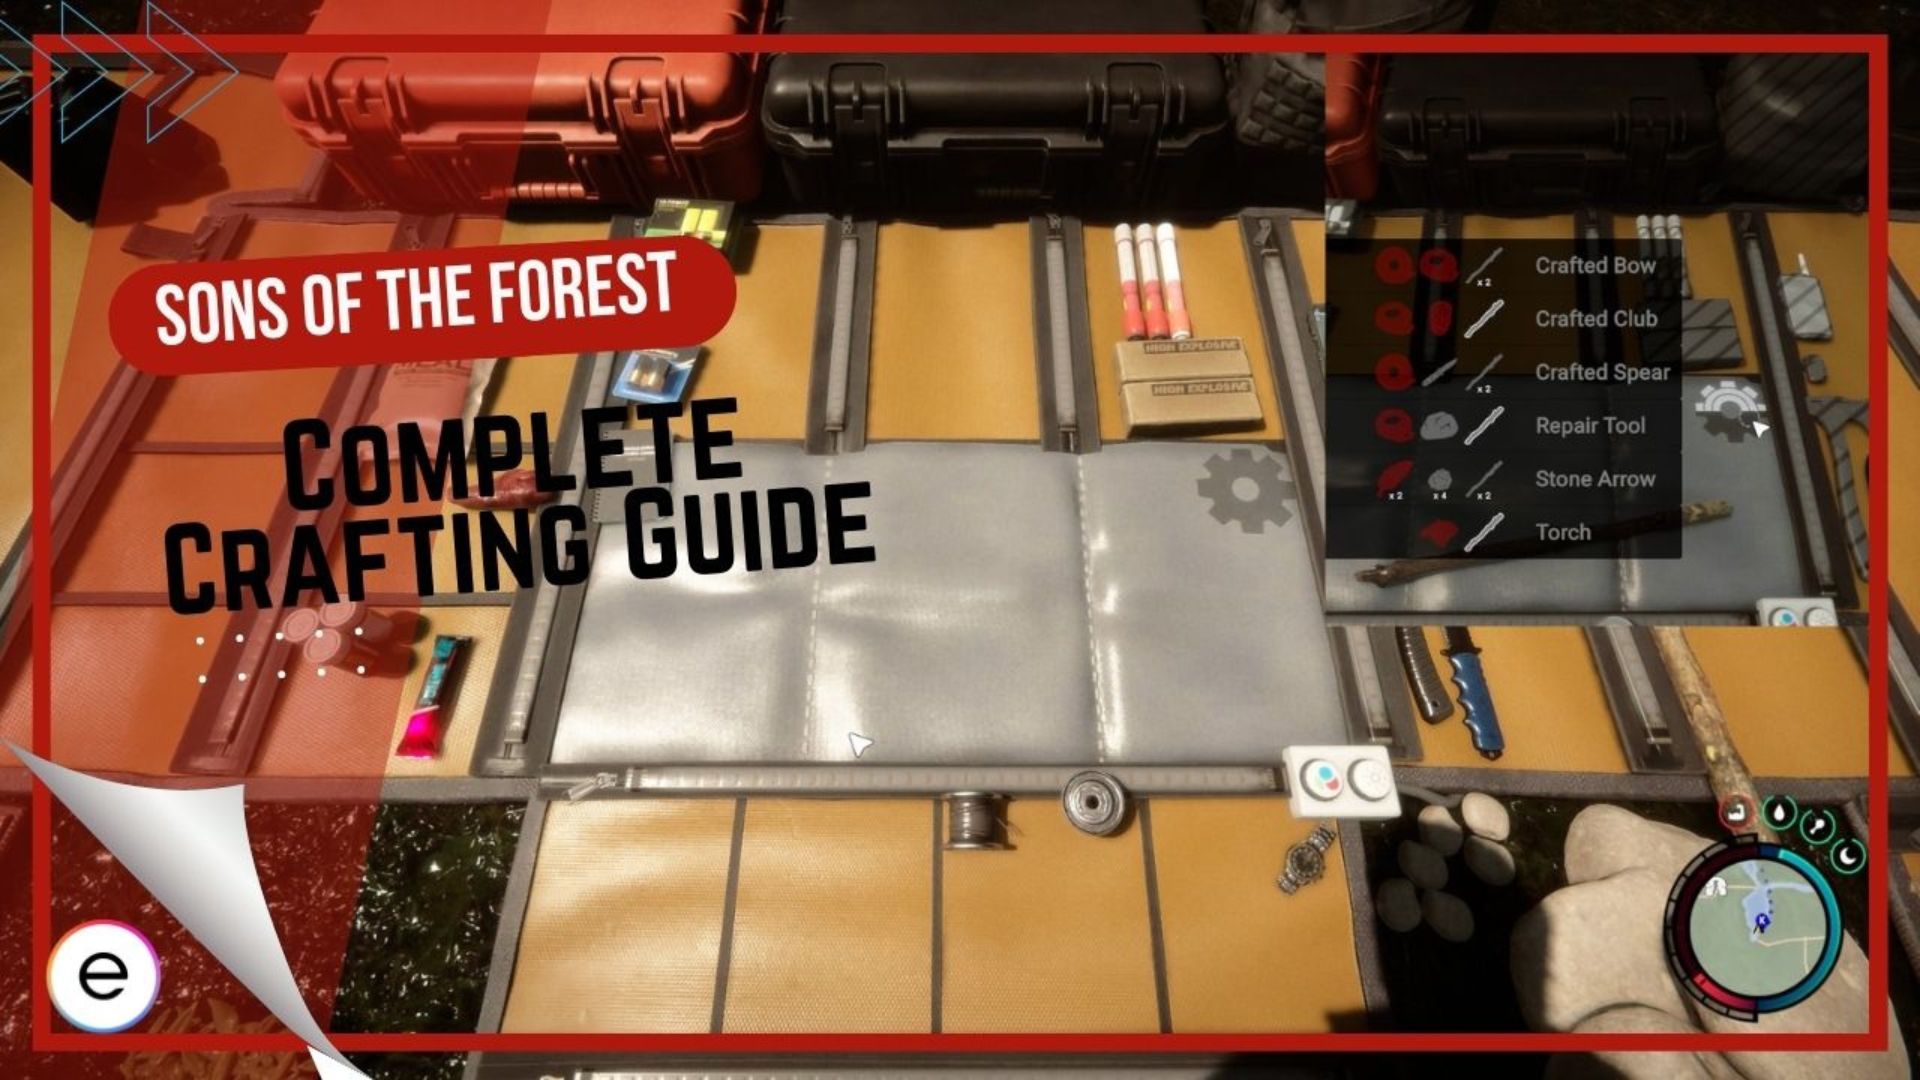 How To Make a Bed - Sons of the Forest